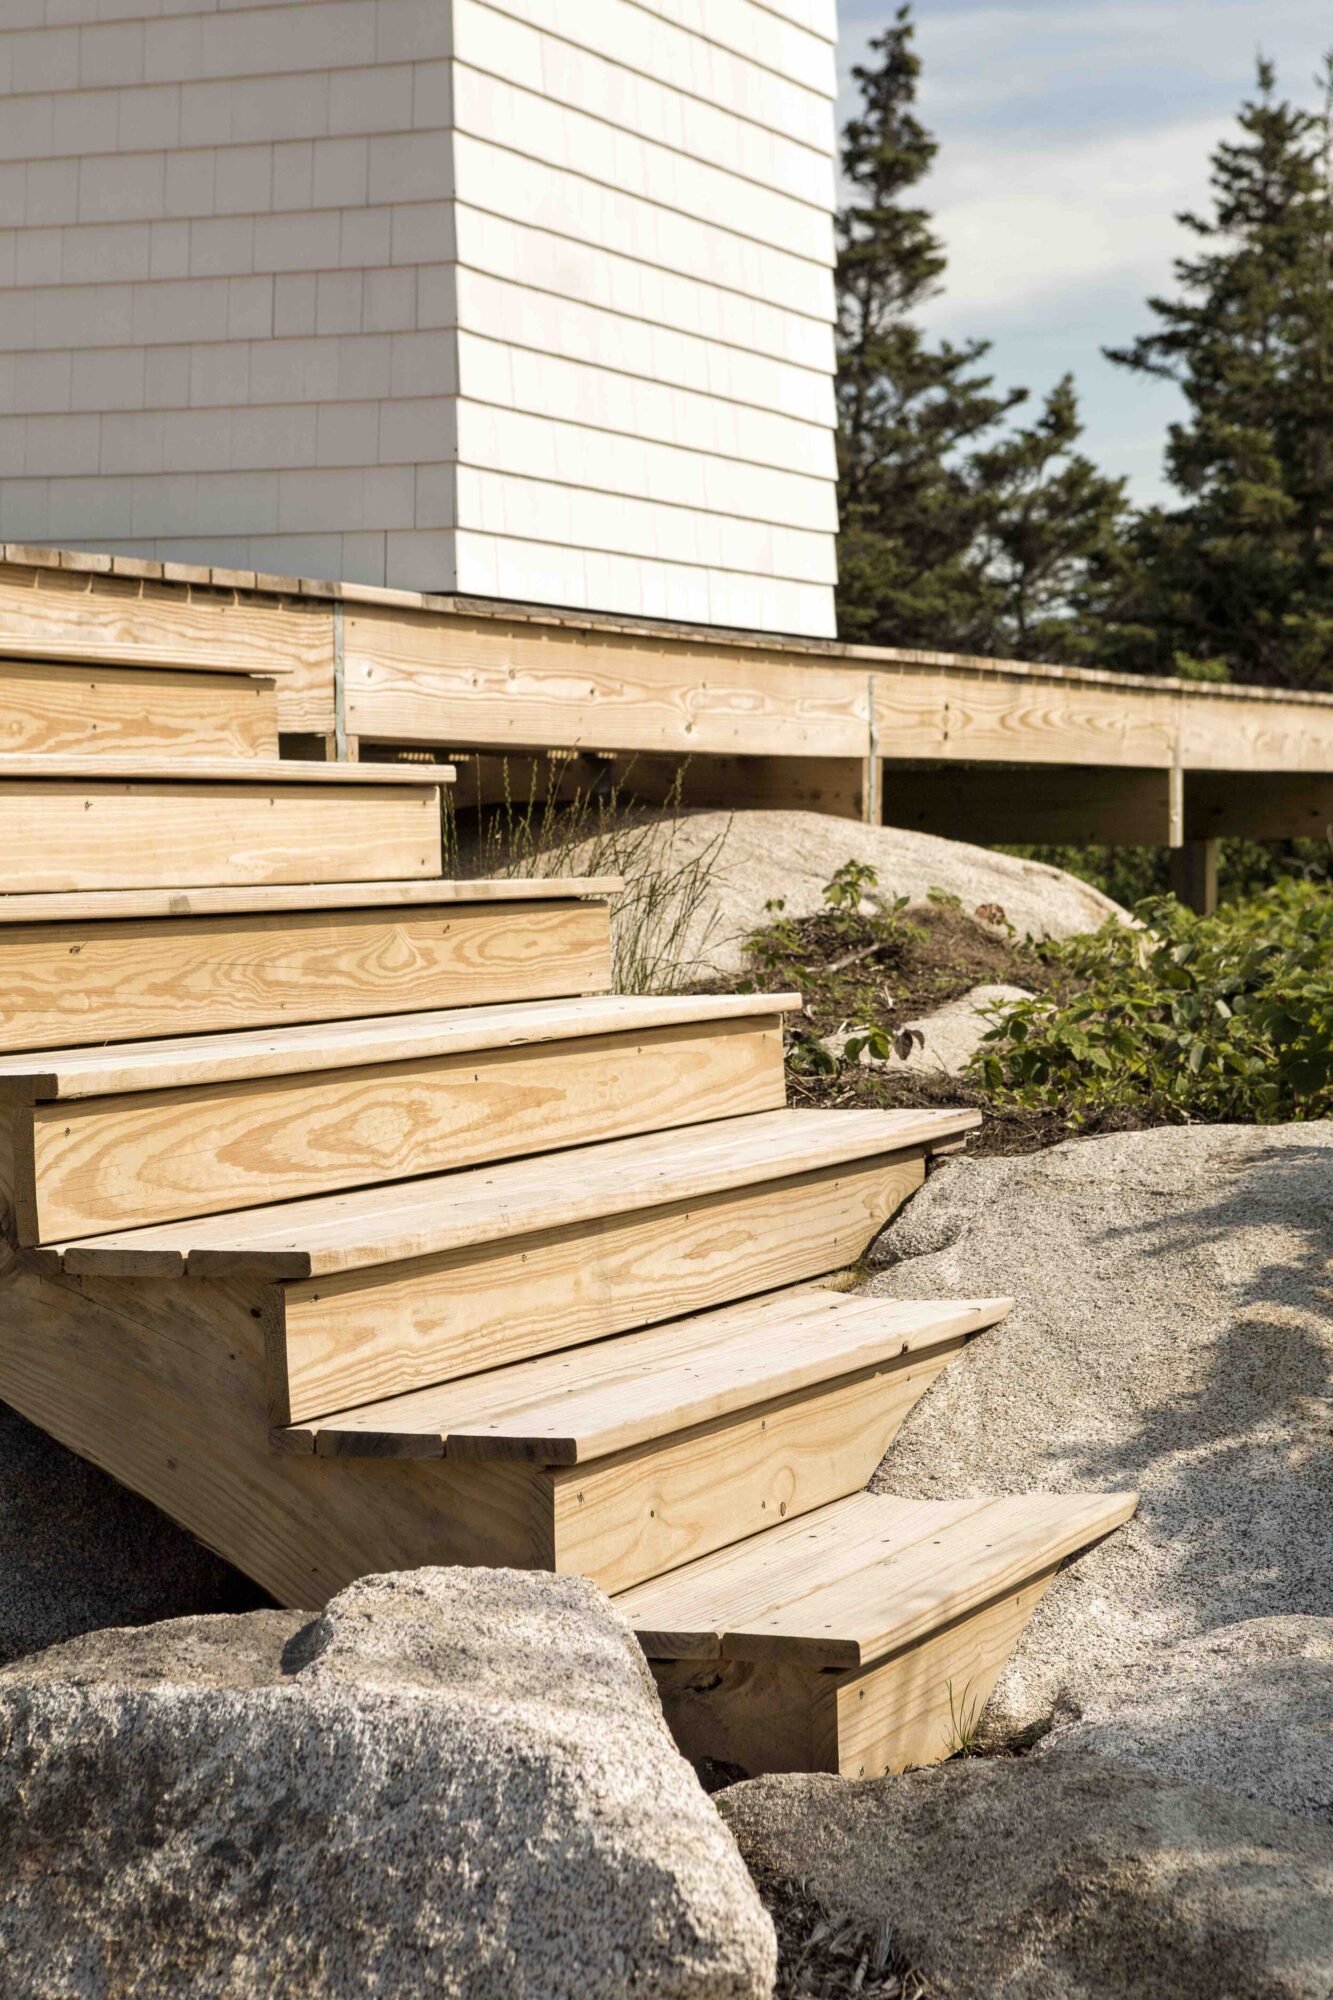  The studios maintain minimal footprints and appear to almost float on pressure-treated wooden decks. Lumber was sourced from Viking Lumber in Damariscotta. 